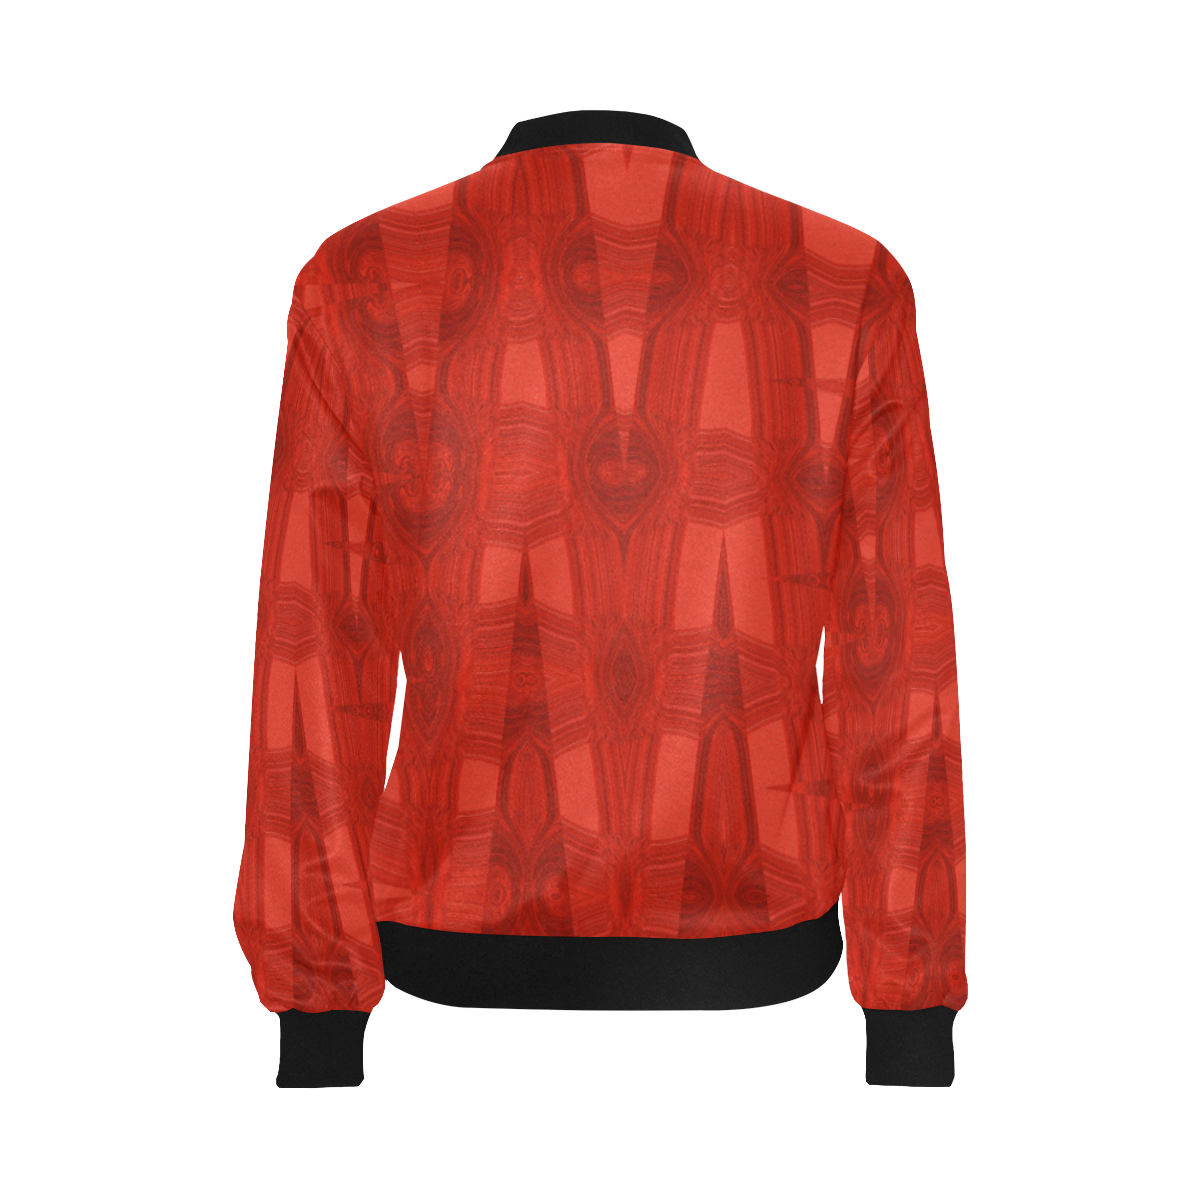 PASSIONATE DIRECTION All Over Print Bomber Jacket for Women (Model H36)